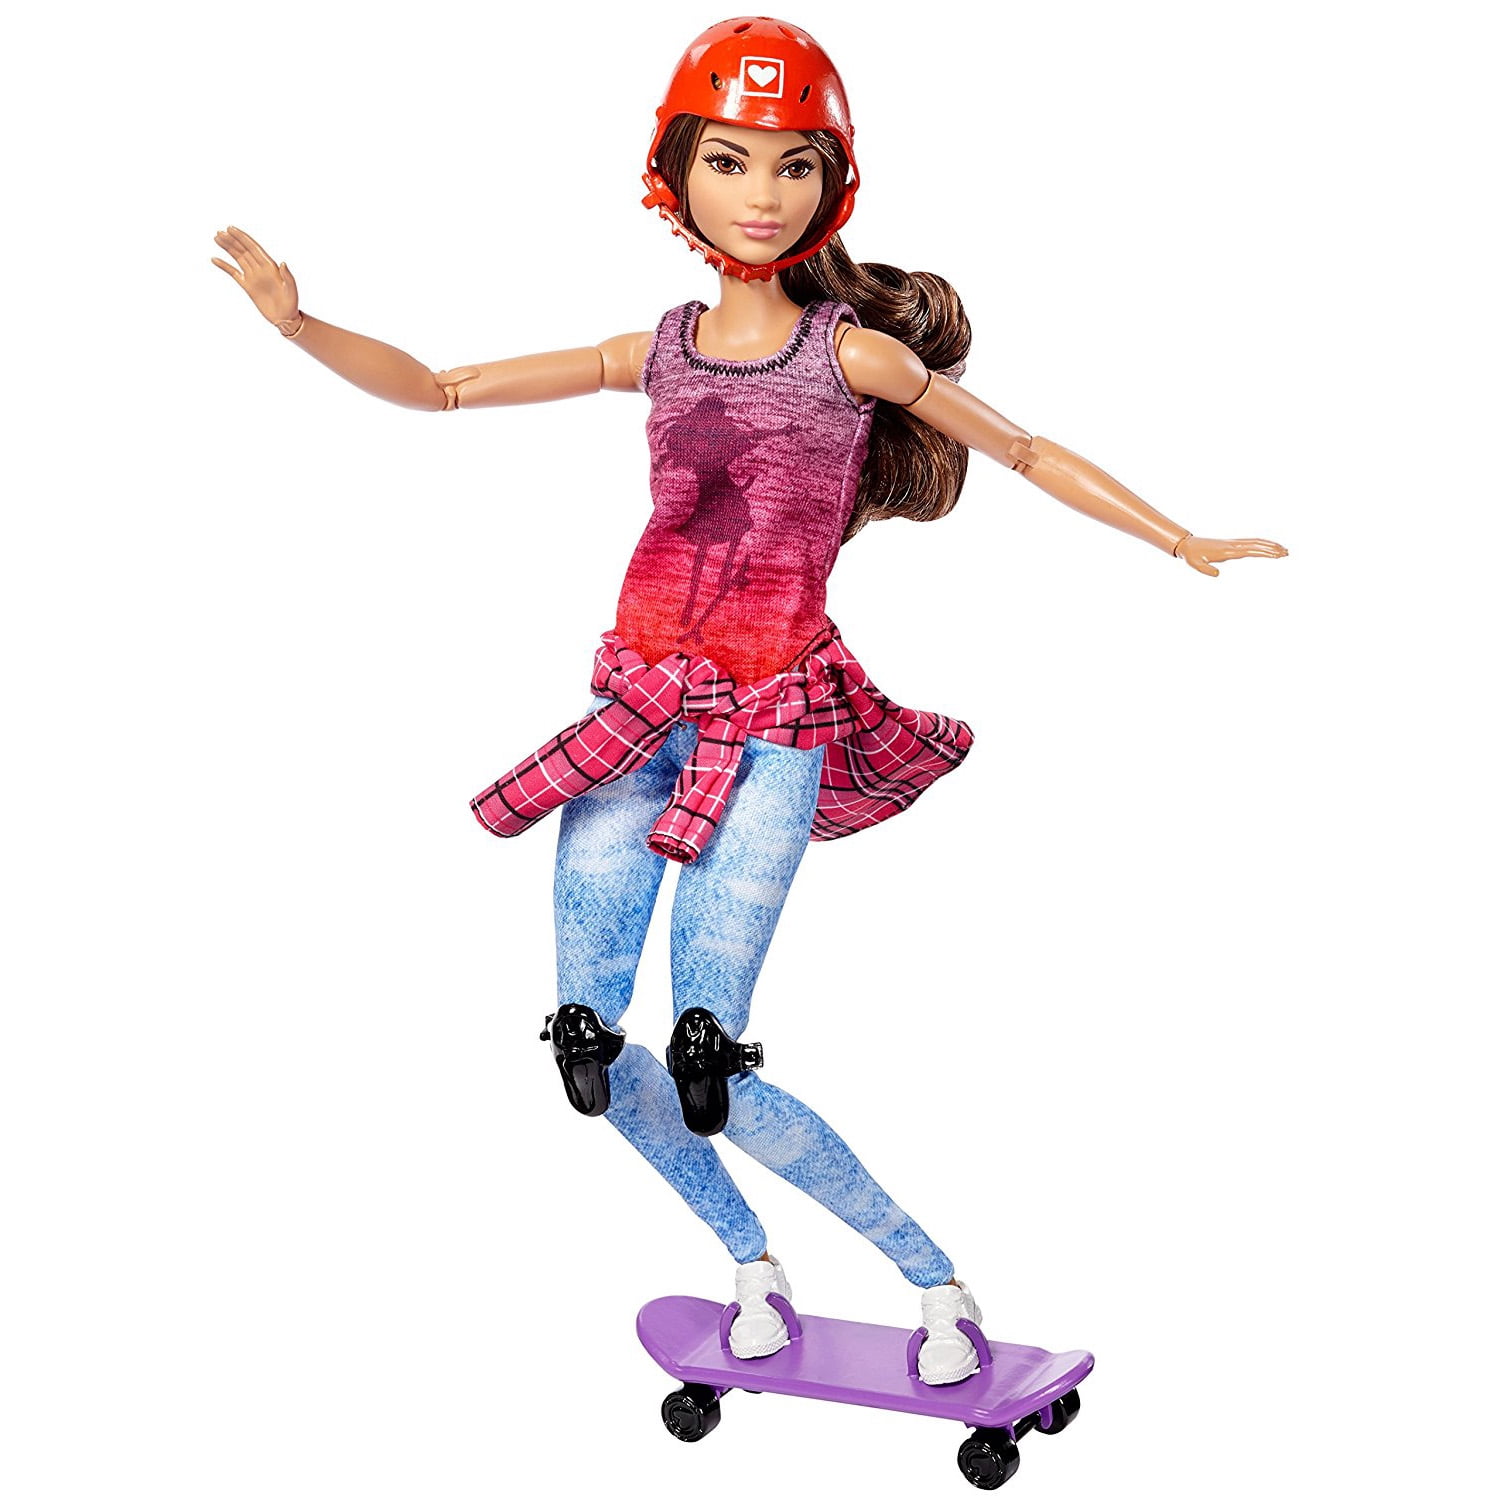 where to buy made to move barbie dolls